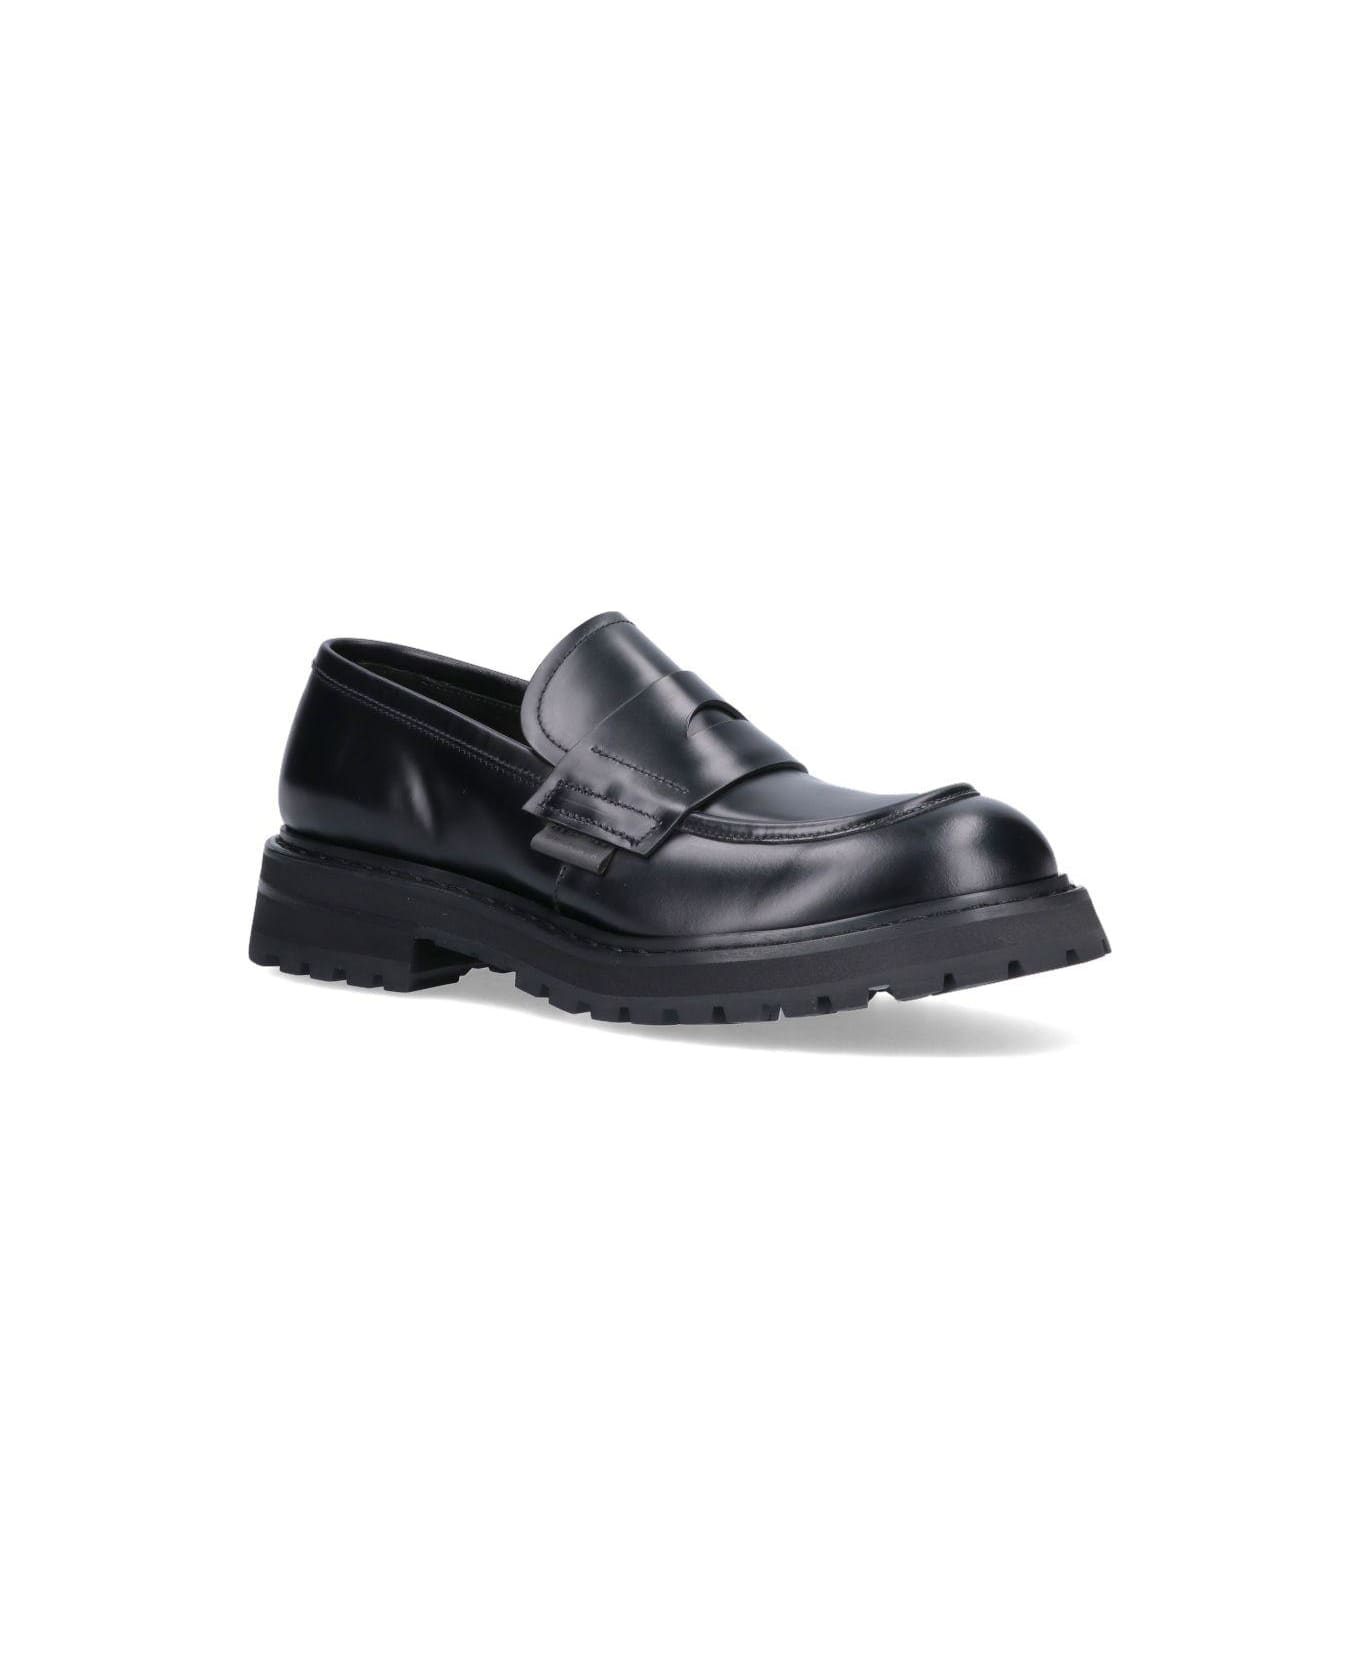 Premiata Leather Loafers Loafers - NERO ローファー＆デッキシューズ